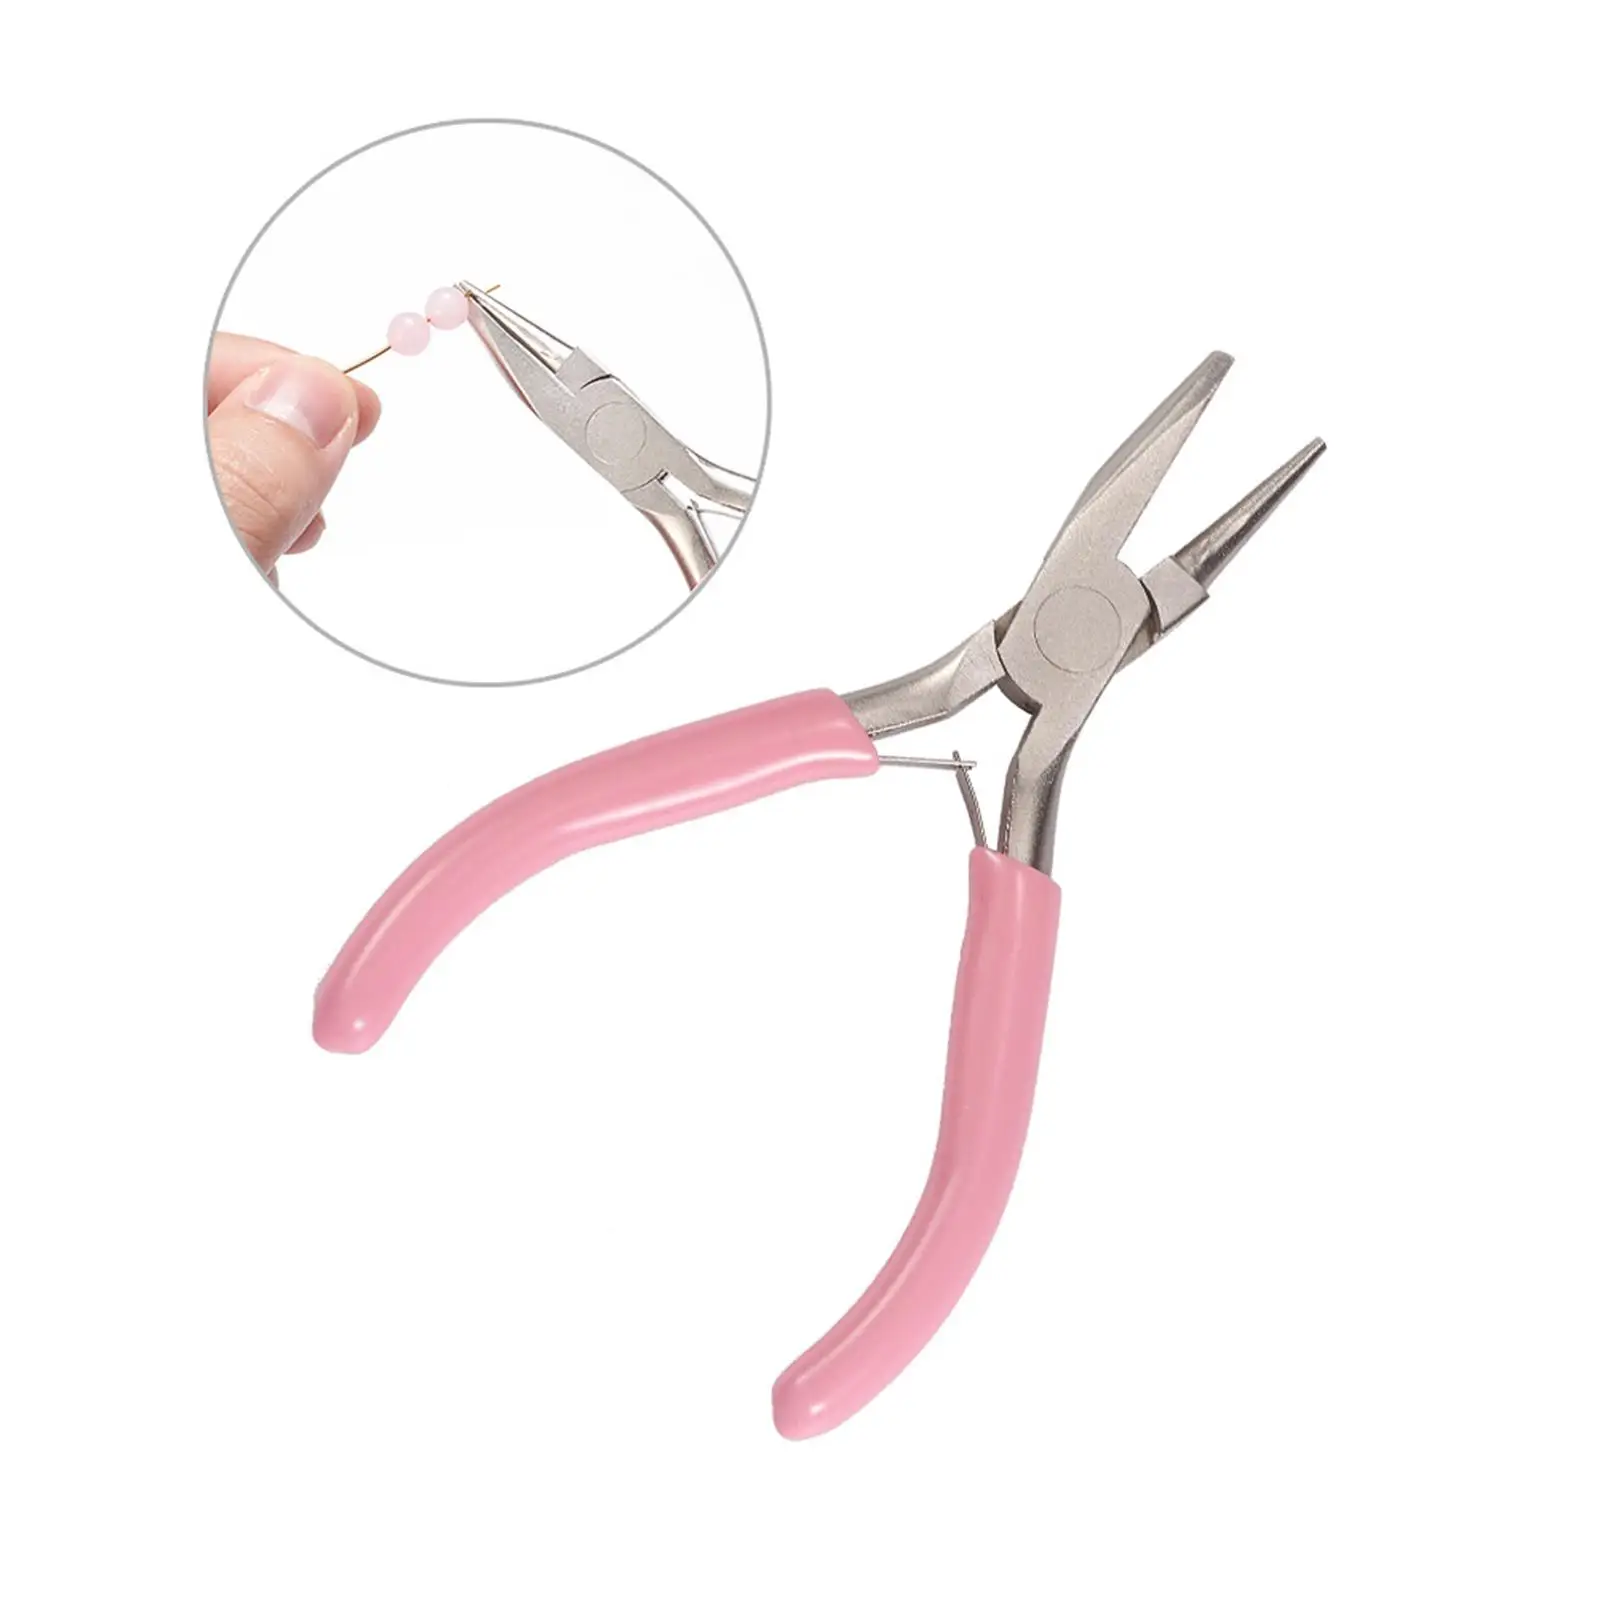 Round Concave Pliers Sturdy Wire Bending with None Slip Handle Professional Wire Looping Pliers for DIY Crafts Looping Loops